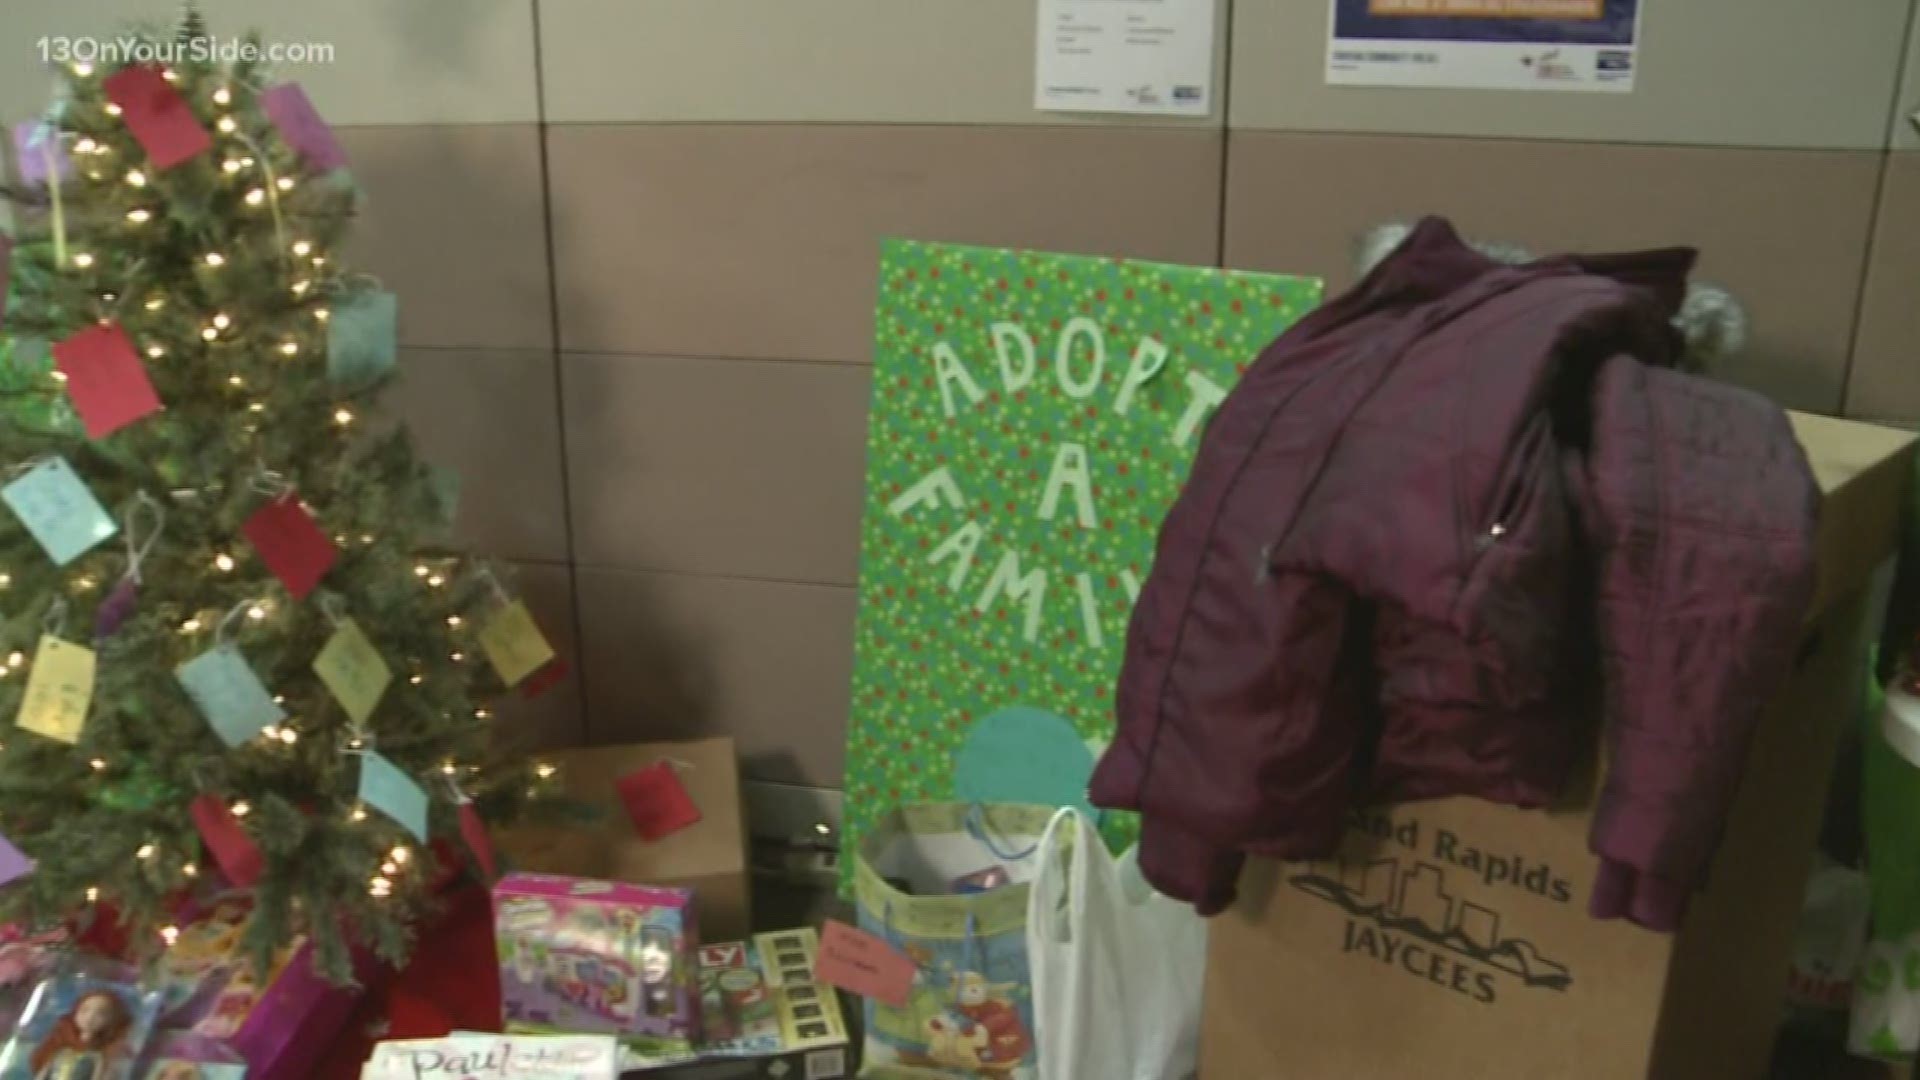 The holiday season is the perfect time to give back to the community in a meaningful way.